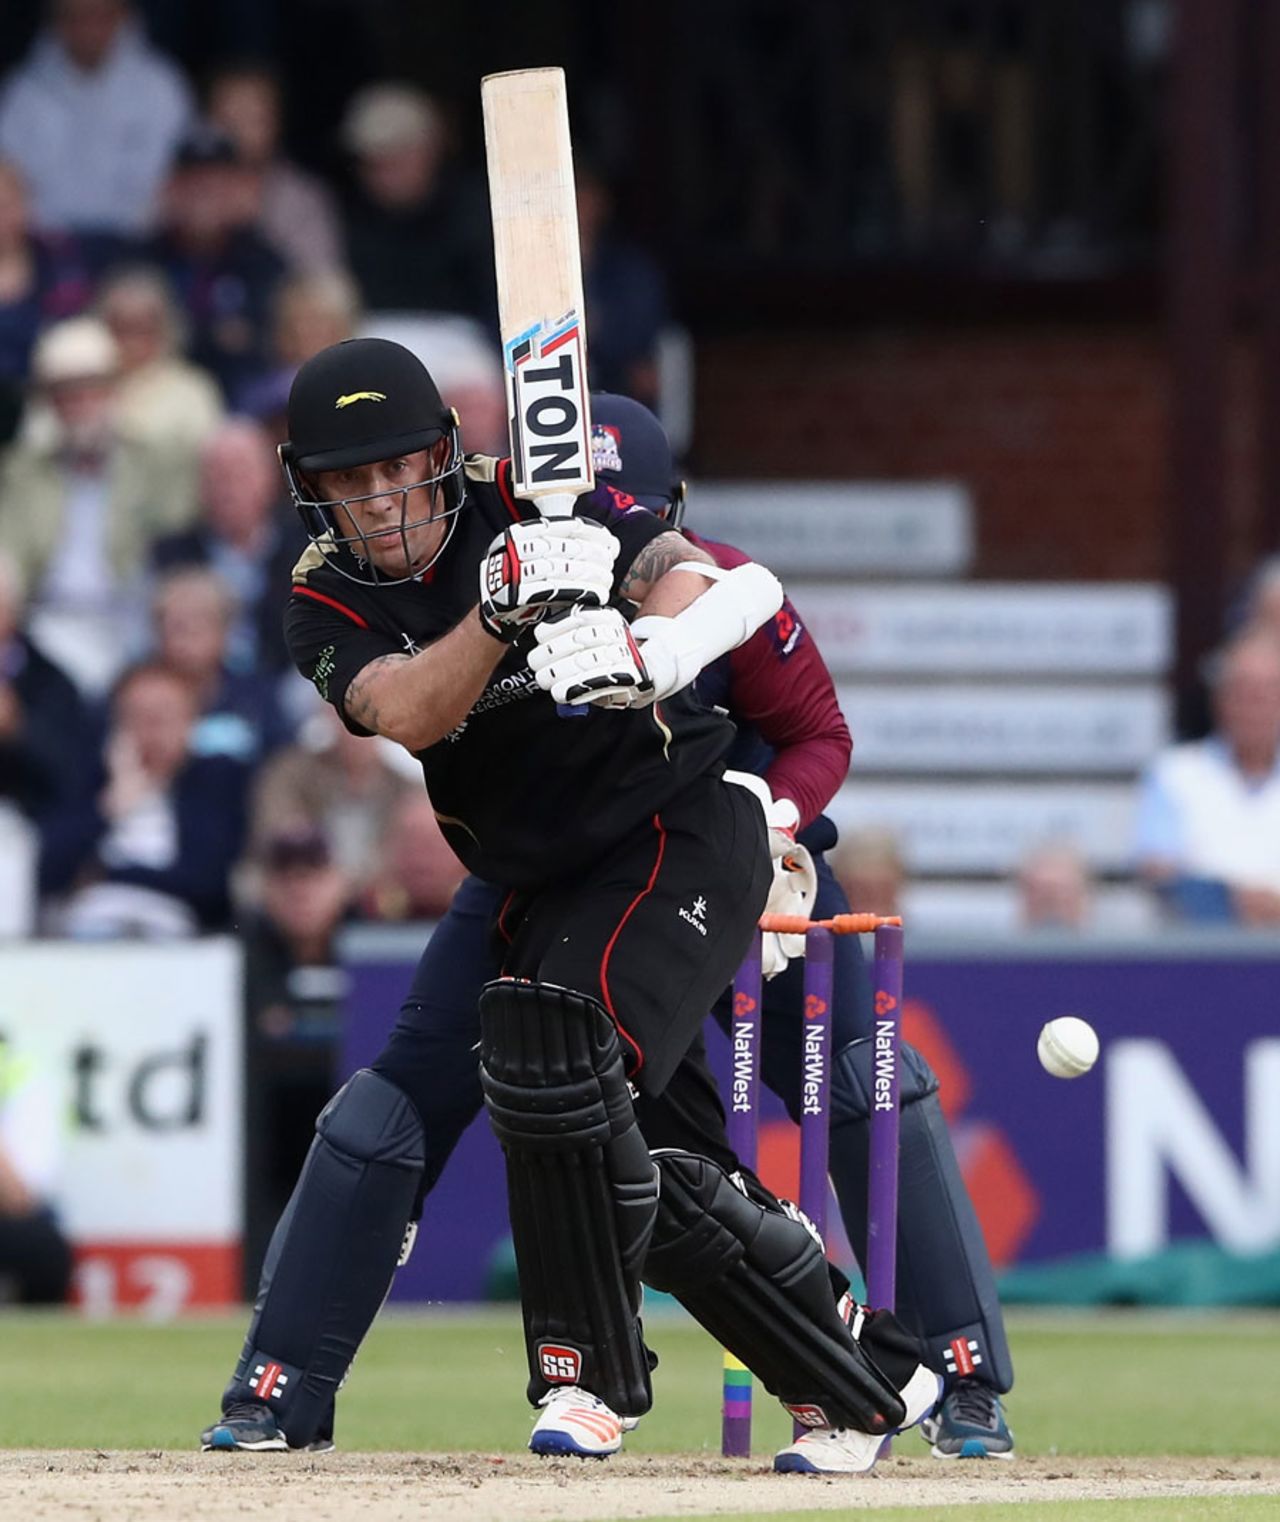 Luke Ronchi hammered 59 off 36 balls, Northamptonshire v Leicestershire, NatWest T20 Blast, North Group, Wantage Road, August 11, 2017